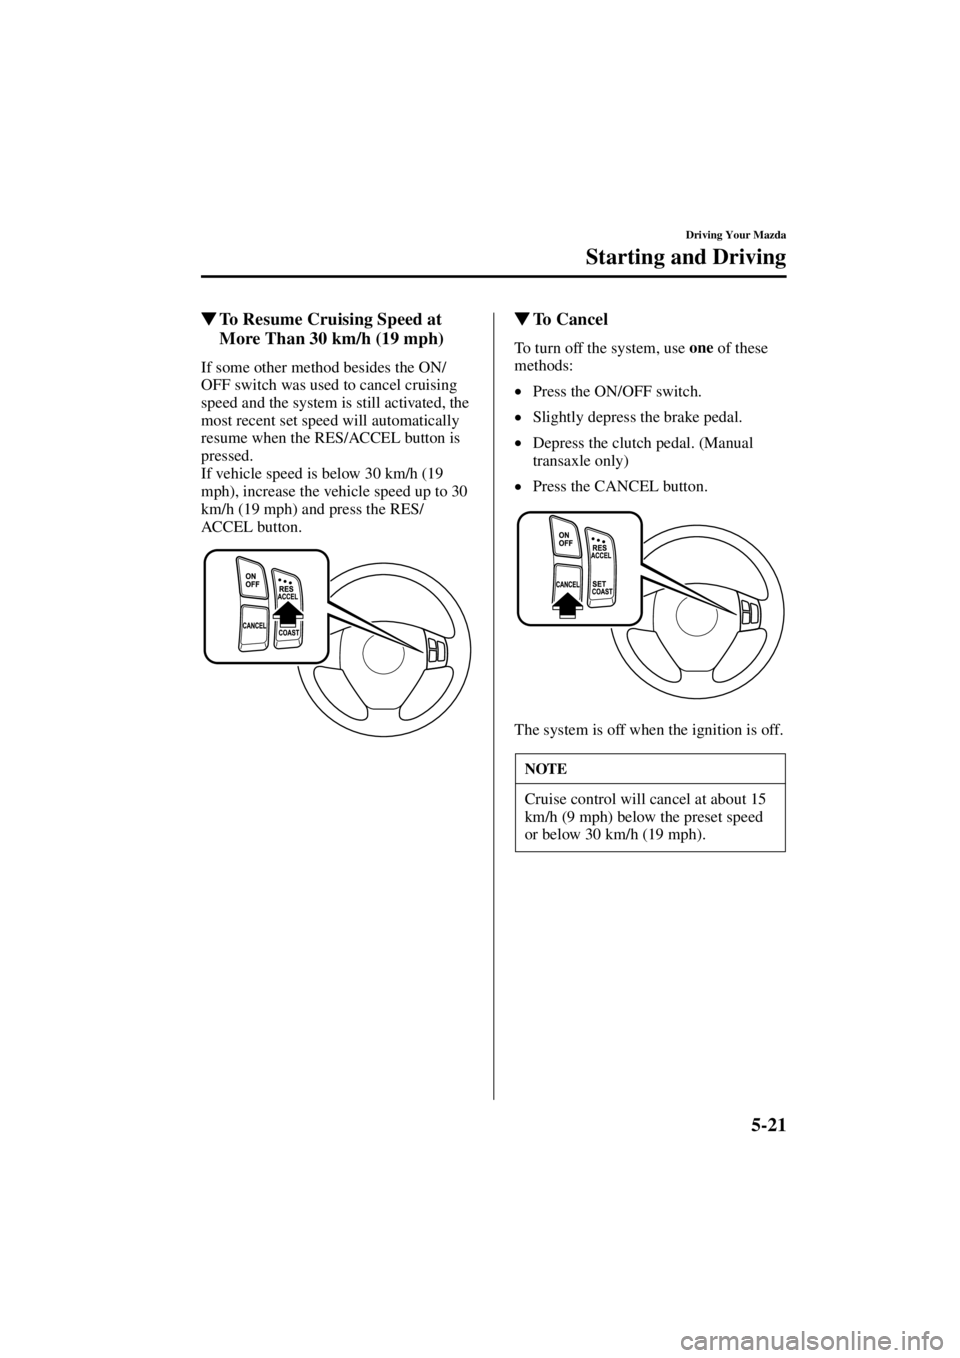 MAZDA MODEL 3 5-DOOR 2004  Owners Manual 5-21
Driving Your Mazda
Starting and Driving
Form No. 8S18-EA-03I
To Resume Cruising Speed at 
More Than 30 km/h (19 mph)
If some other method besides the ON/
OFF switch was used to cancel cruising 
